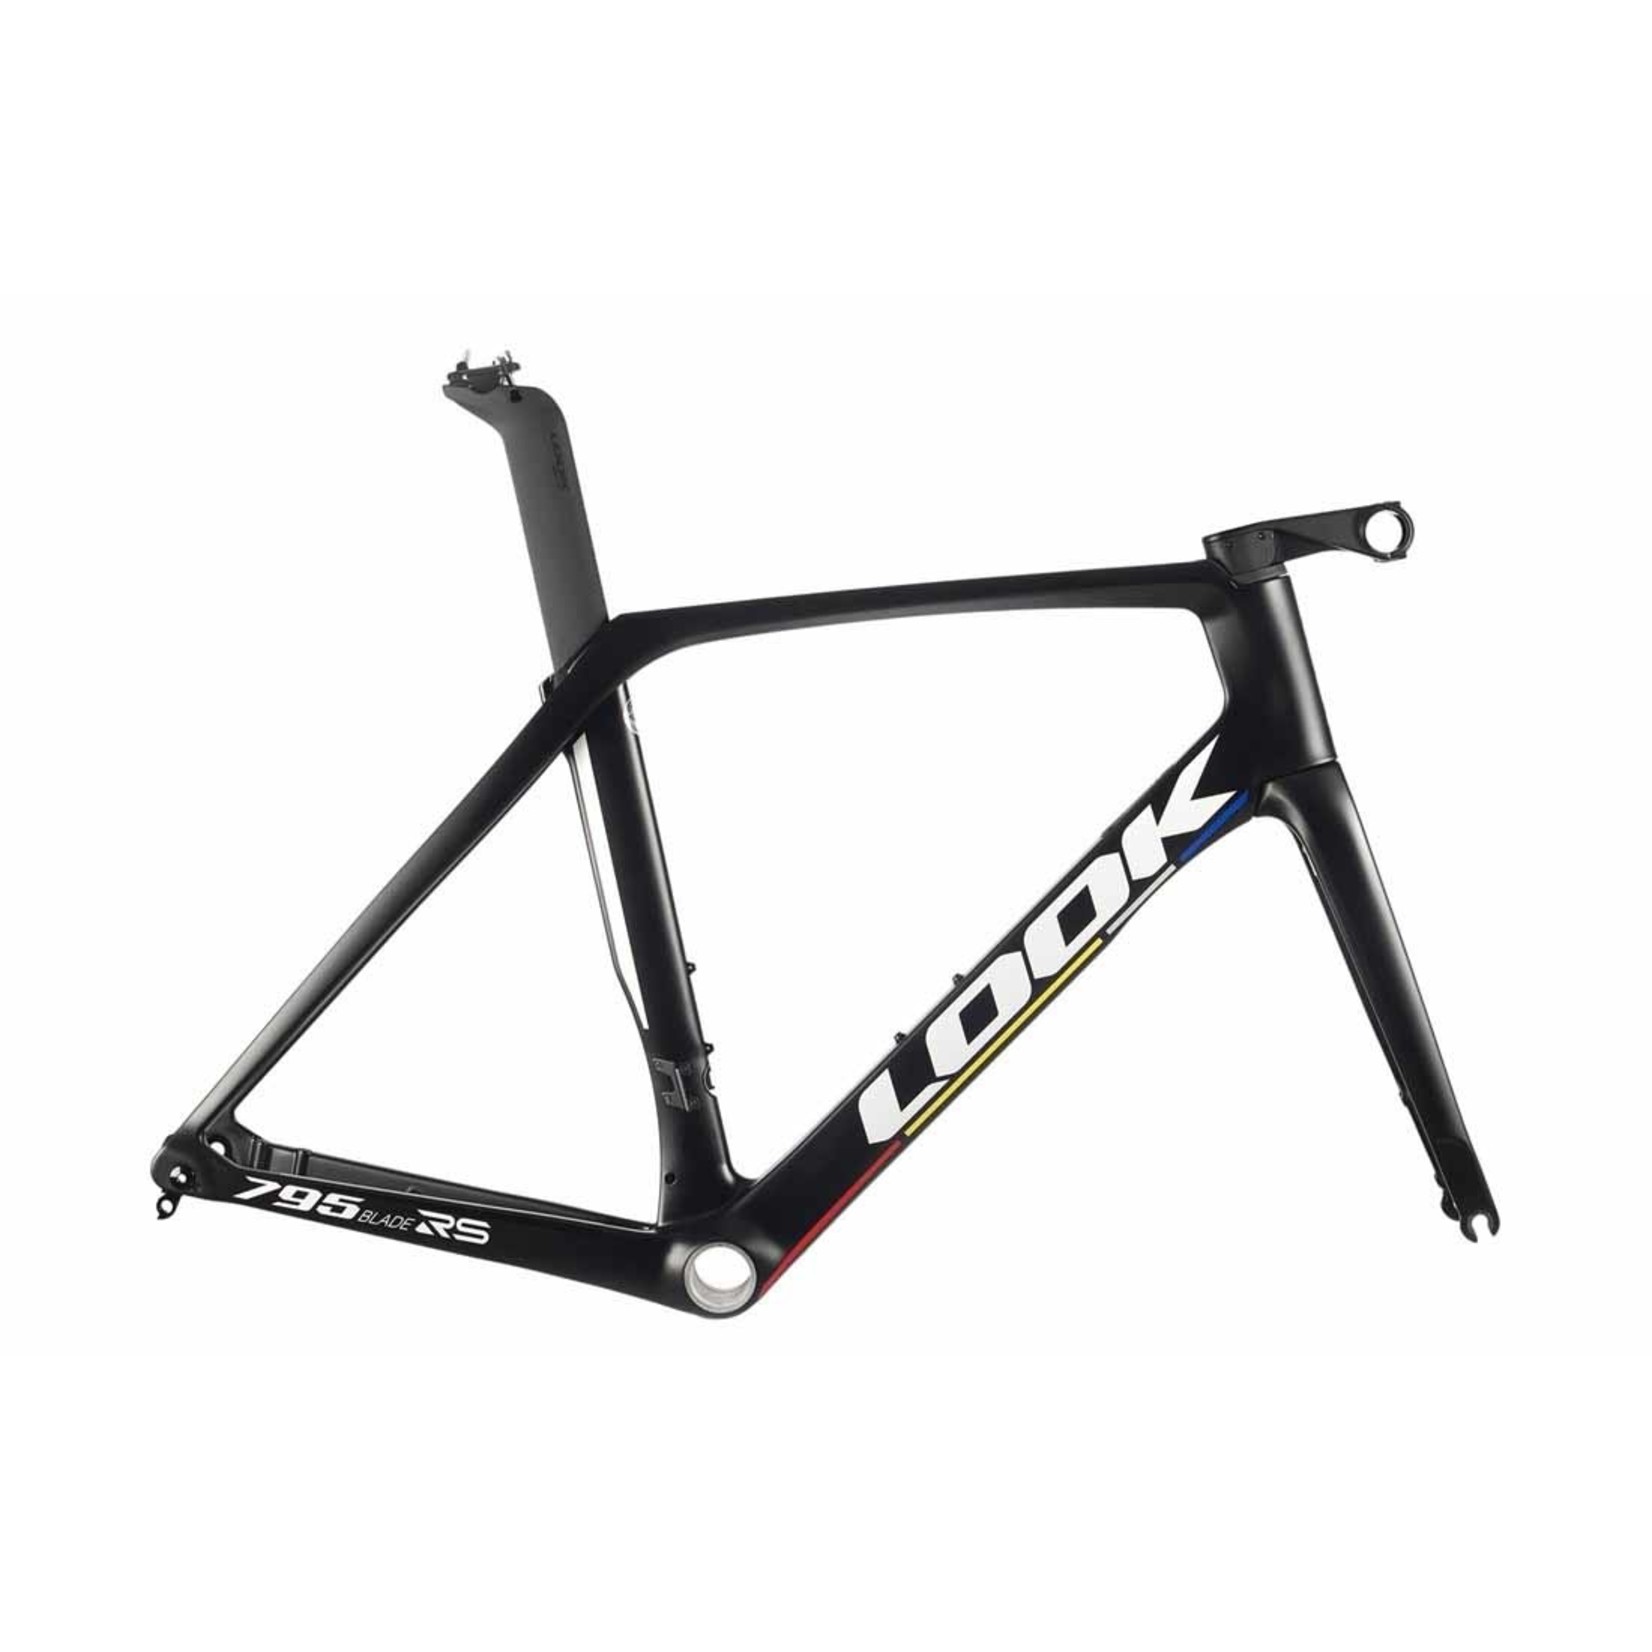 795 Blade Rs Disc Proteam - The Bike Place